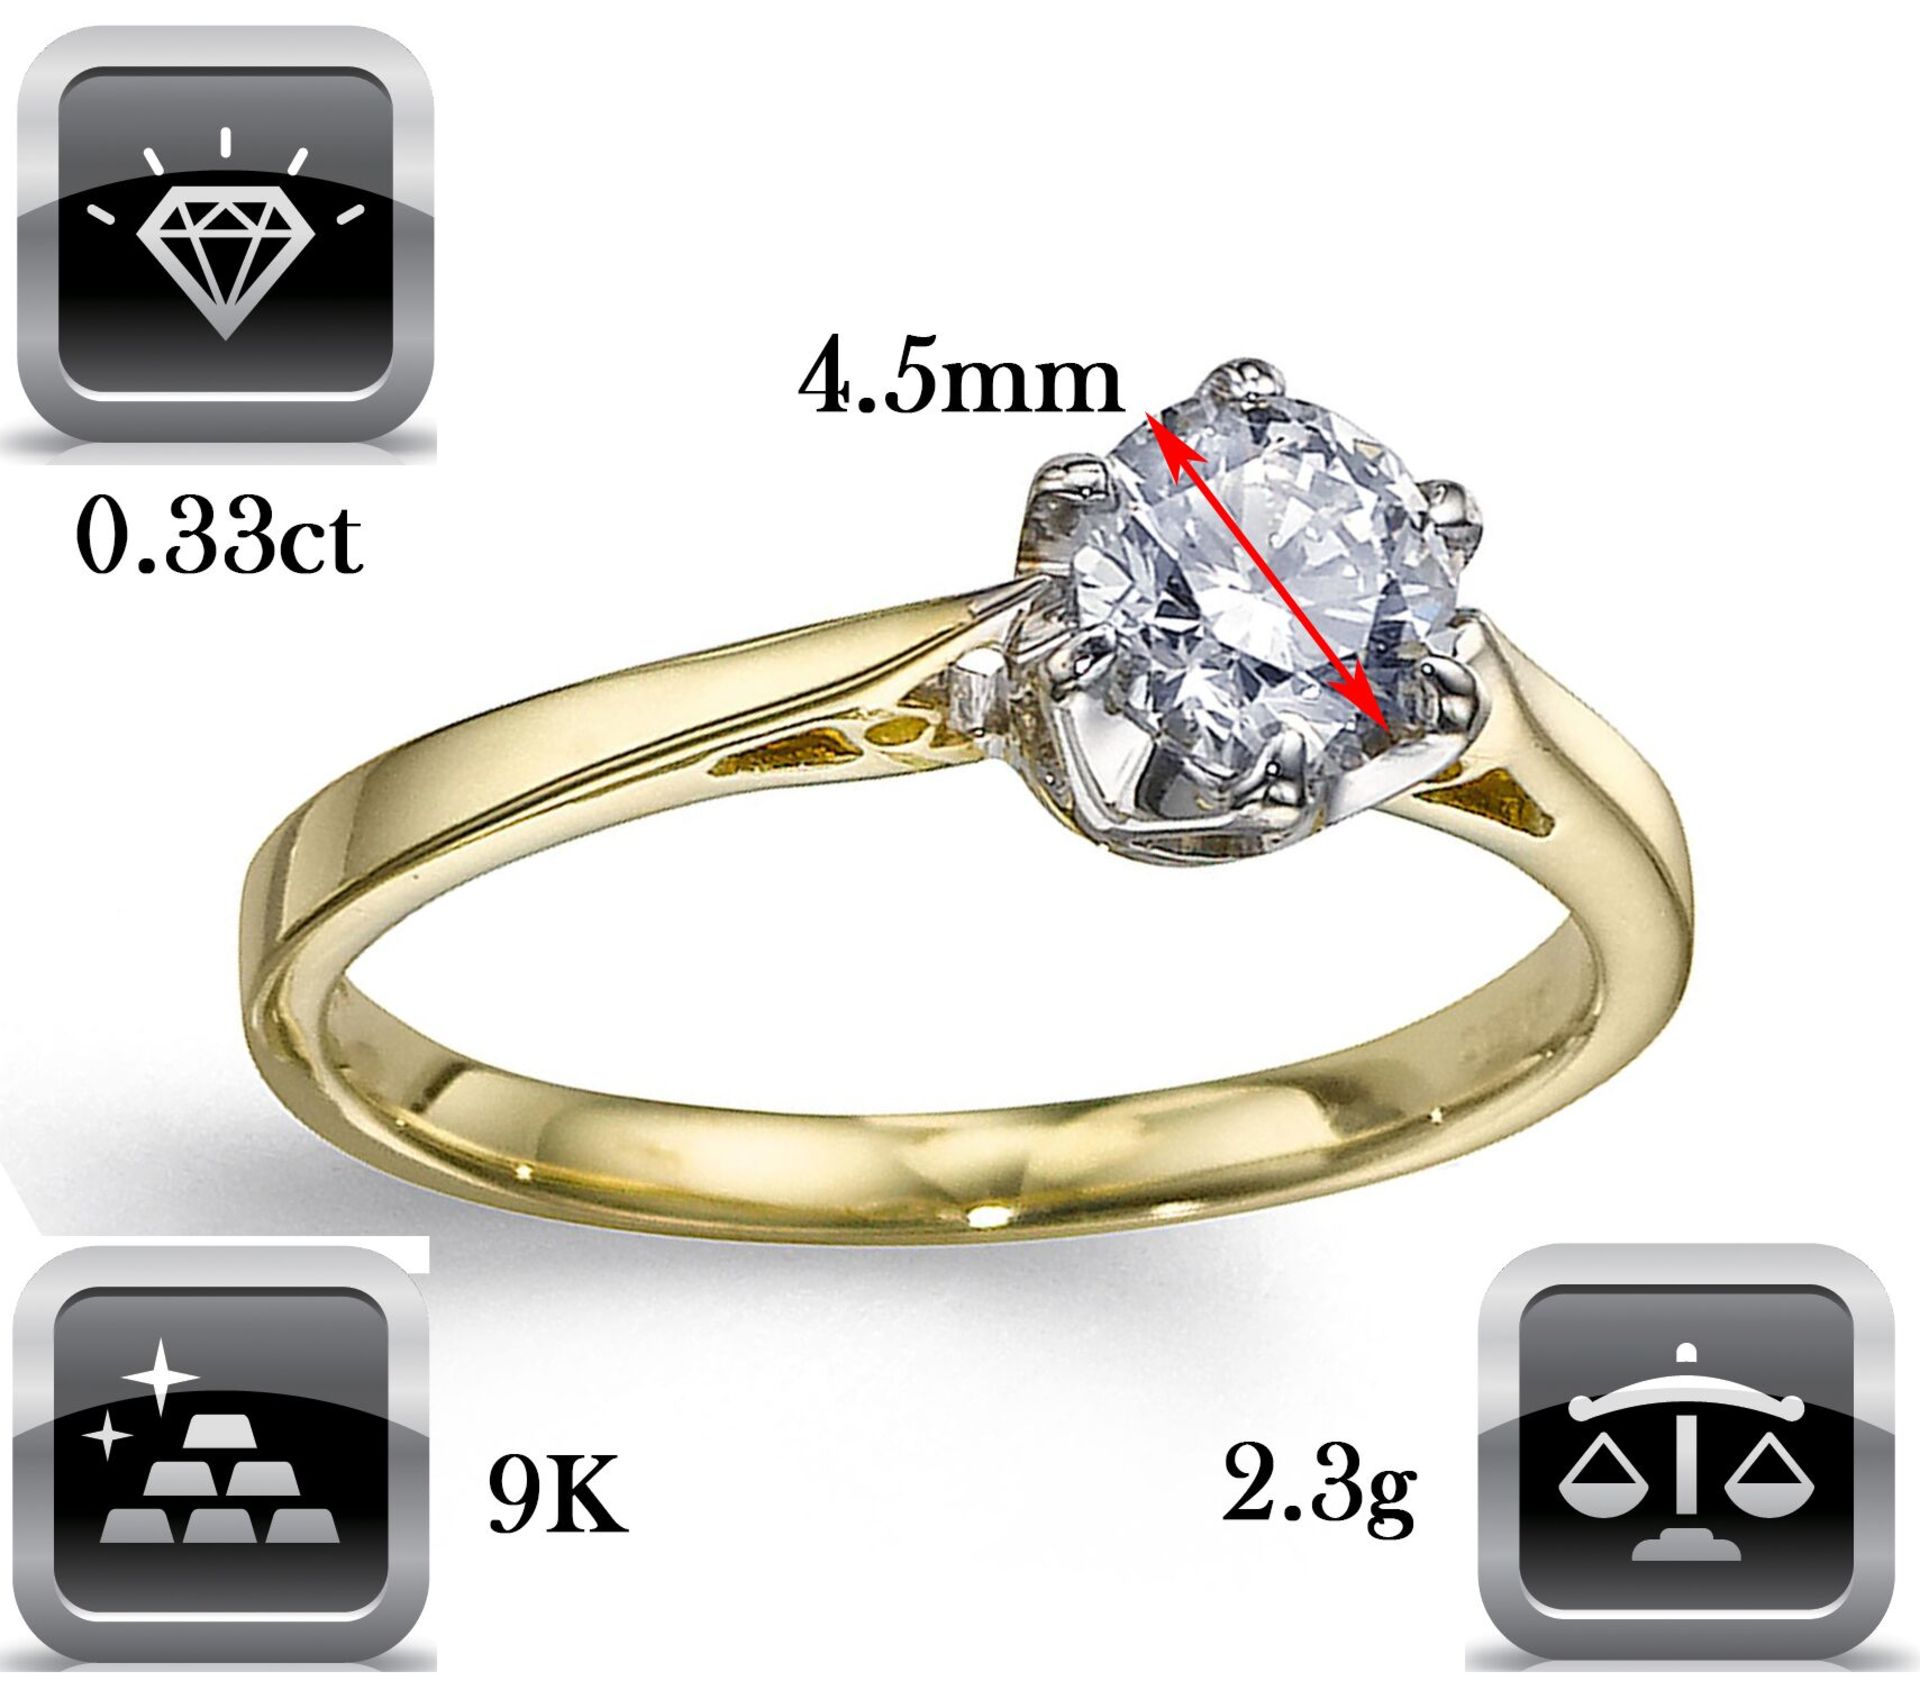 6 Claw Diamond Solitaire Engagement Ring Metal 9k - Image 2 of 3